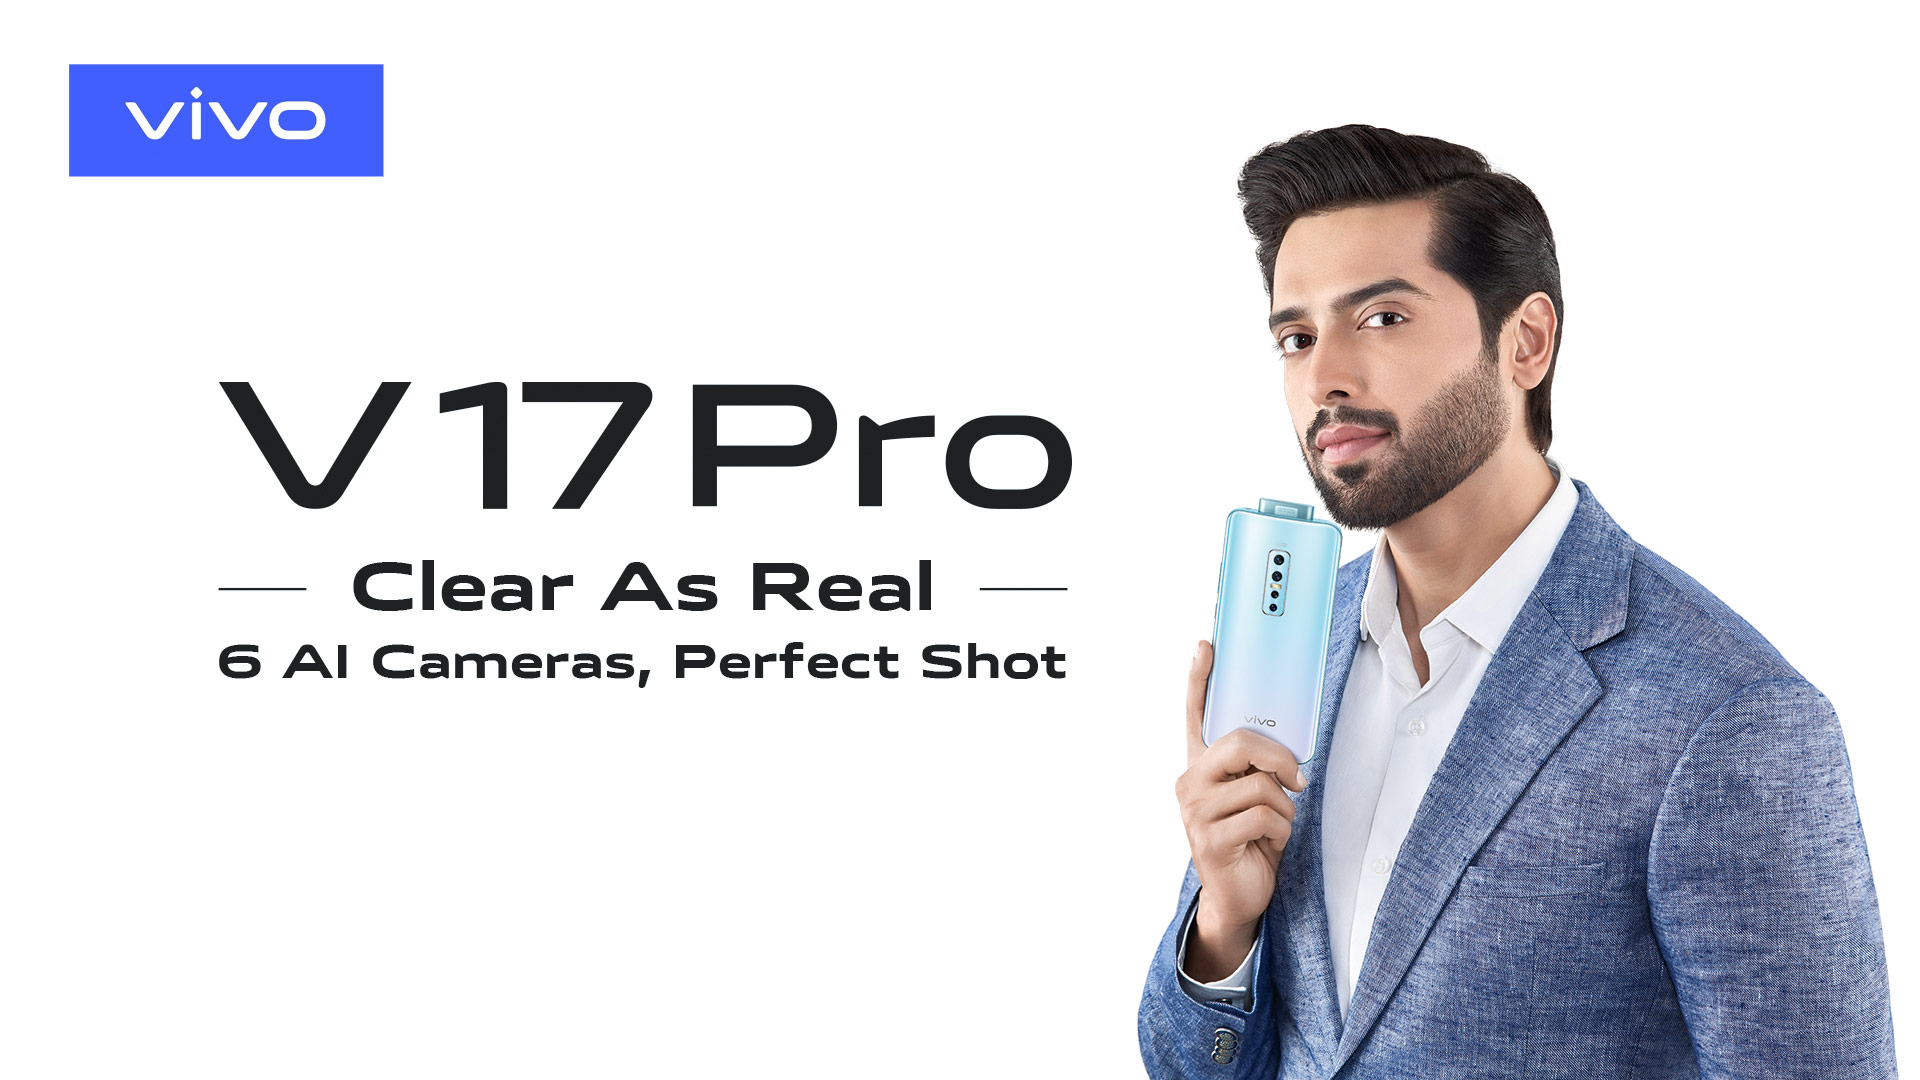 vivo V17 Pro Takes the Iconic Camera Design to New Levels with Industry's-First 32MP Dual Pop-Up Camera